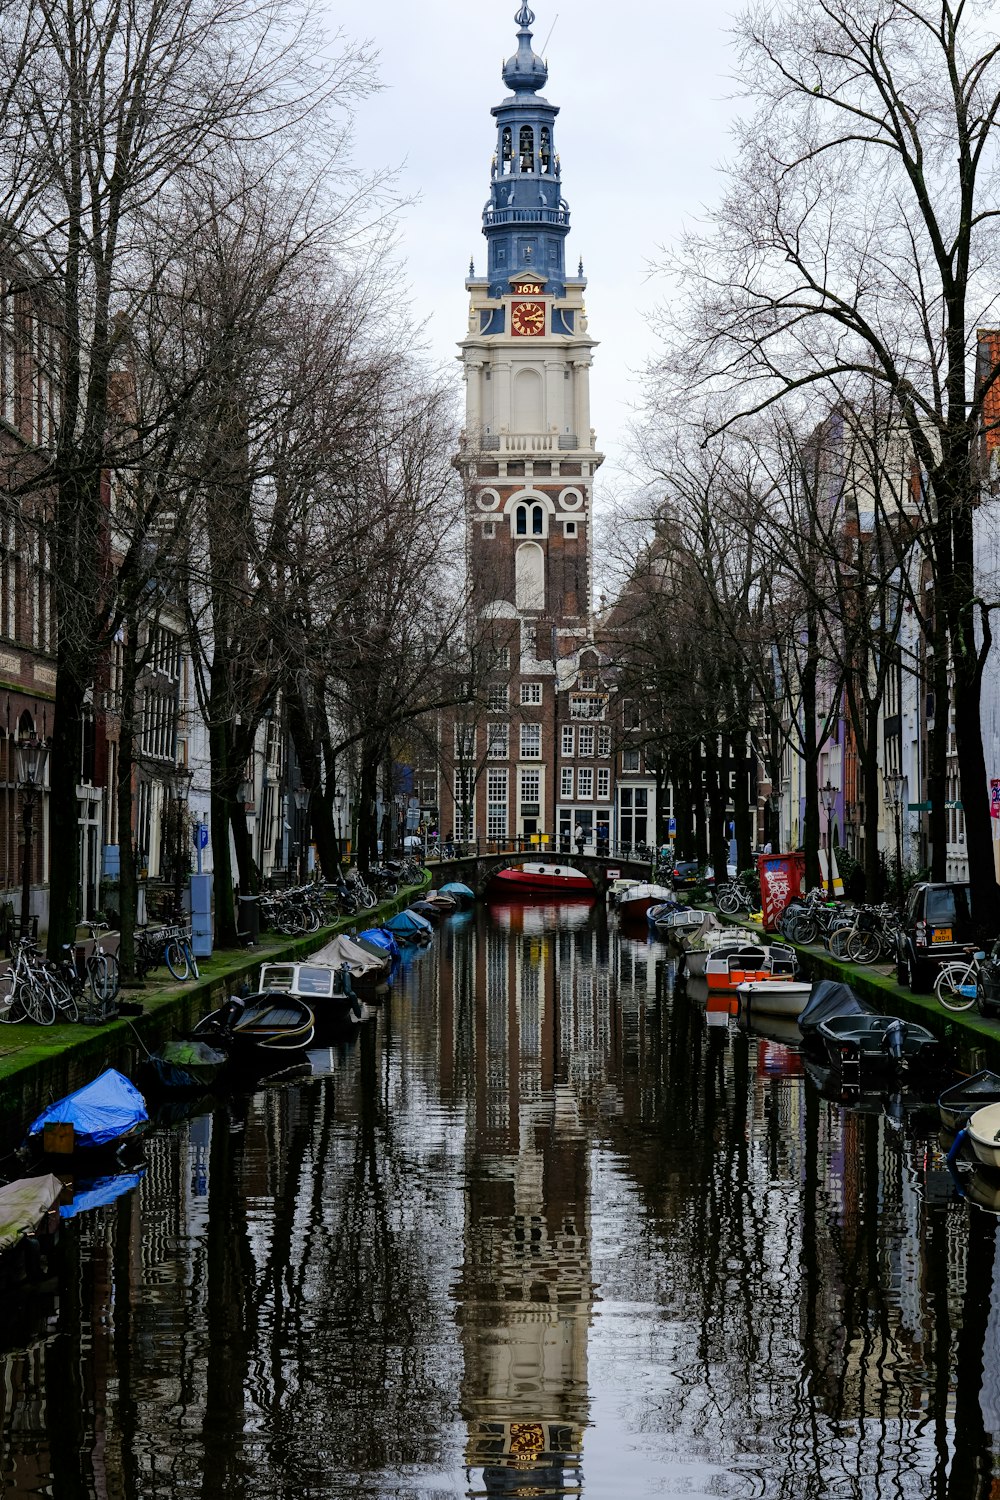 a canal with a clock tower in the background